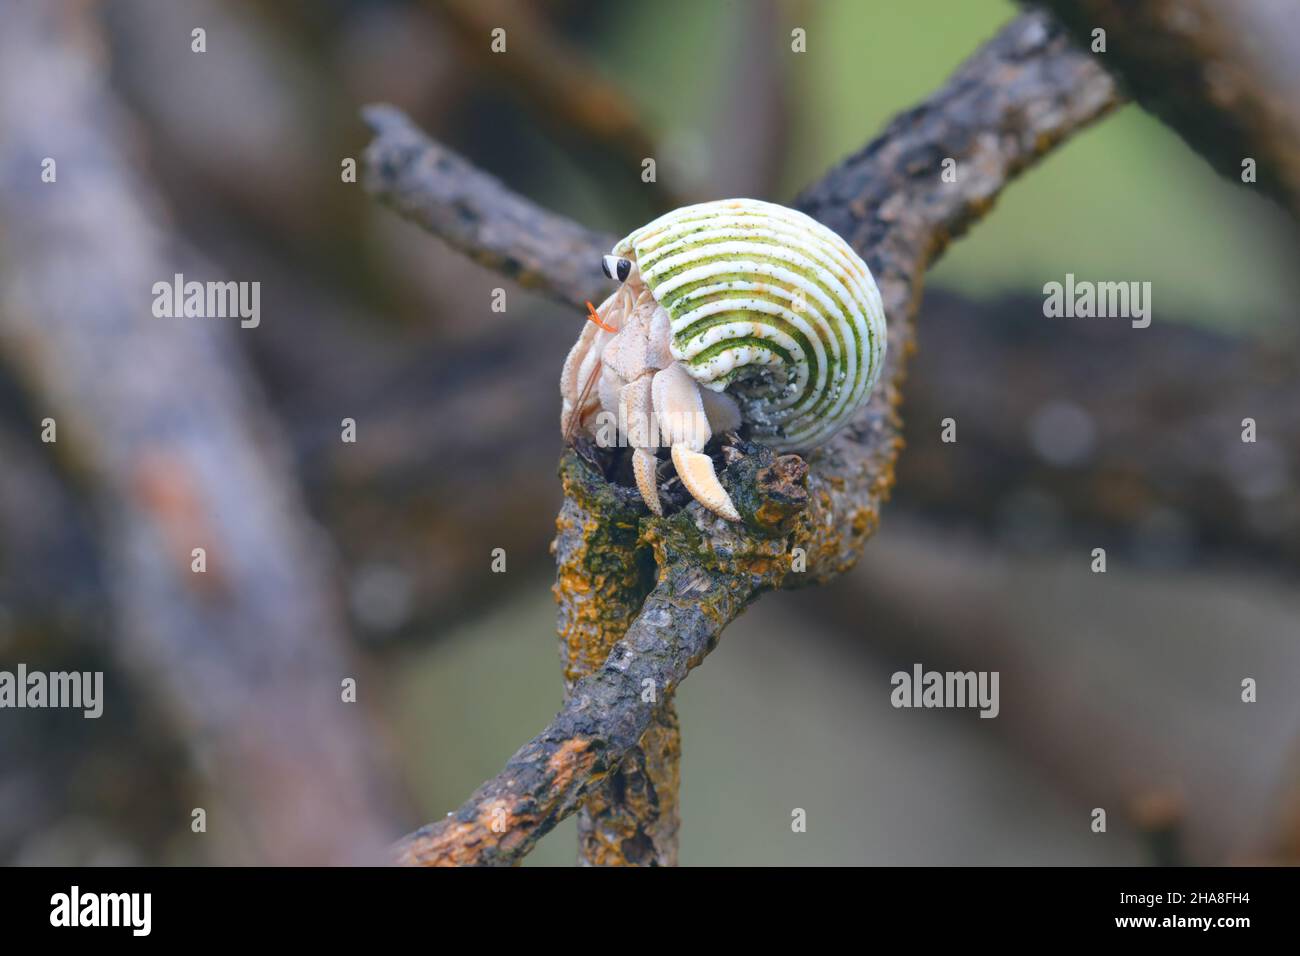 Coenobita perlatus, a species of terrestrial hermit crab known as strawberry hermit crab, on Cosmoldeo atoll in the Seychelles Stock Photo